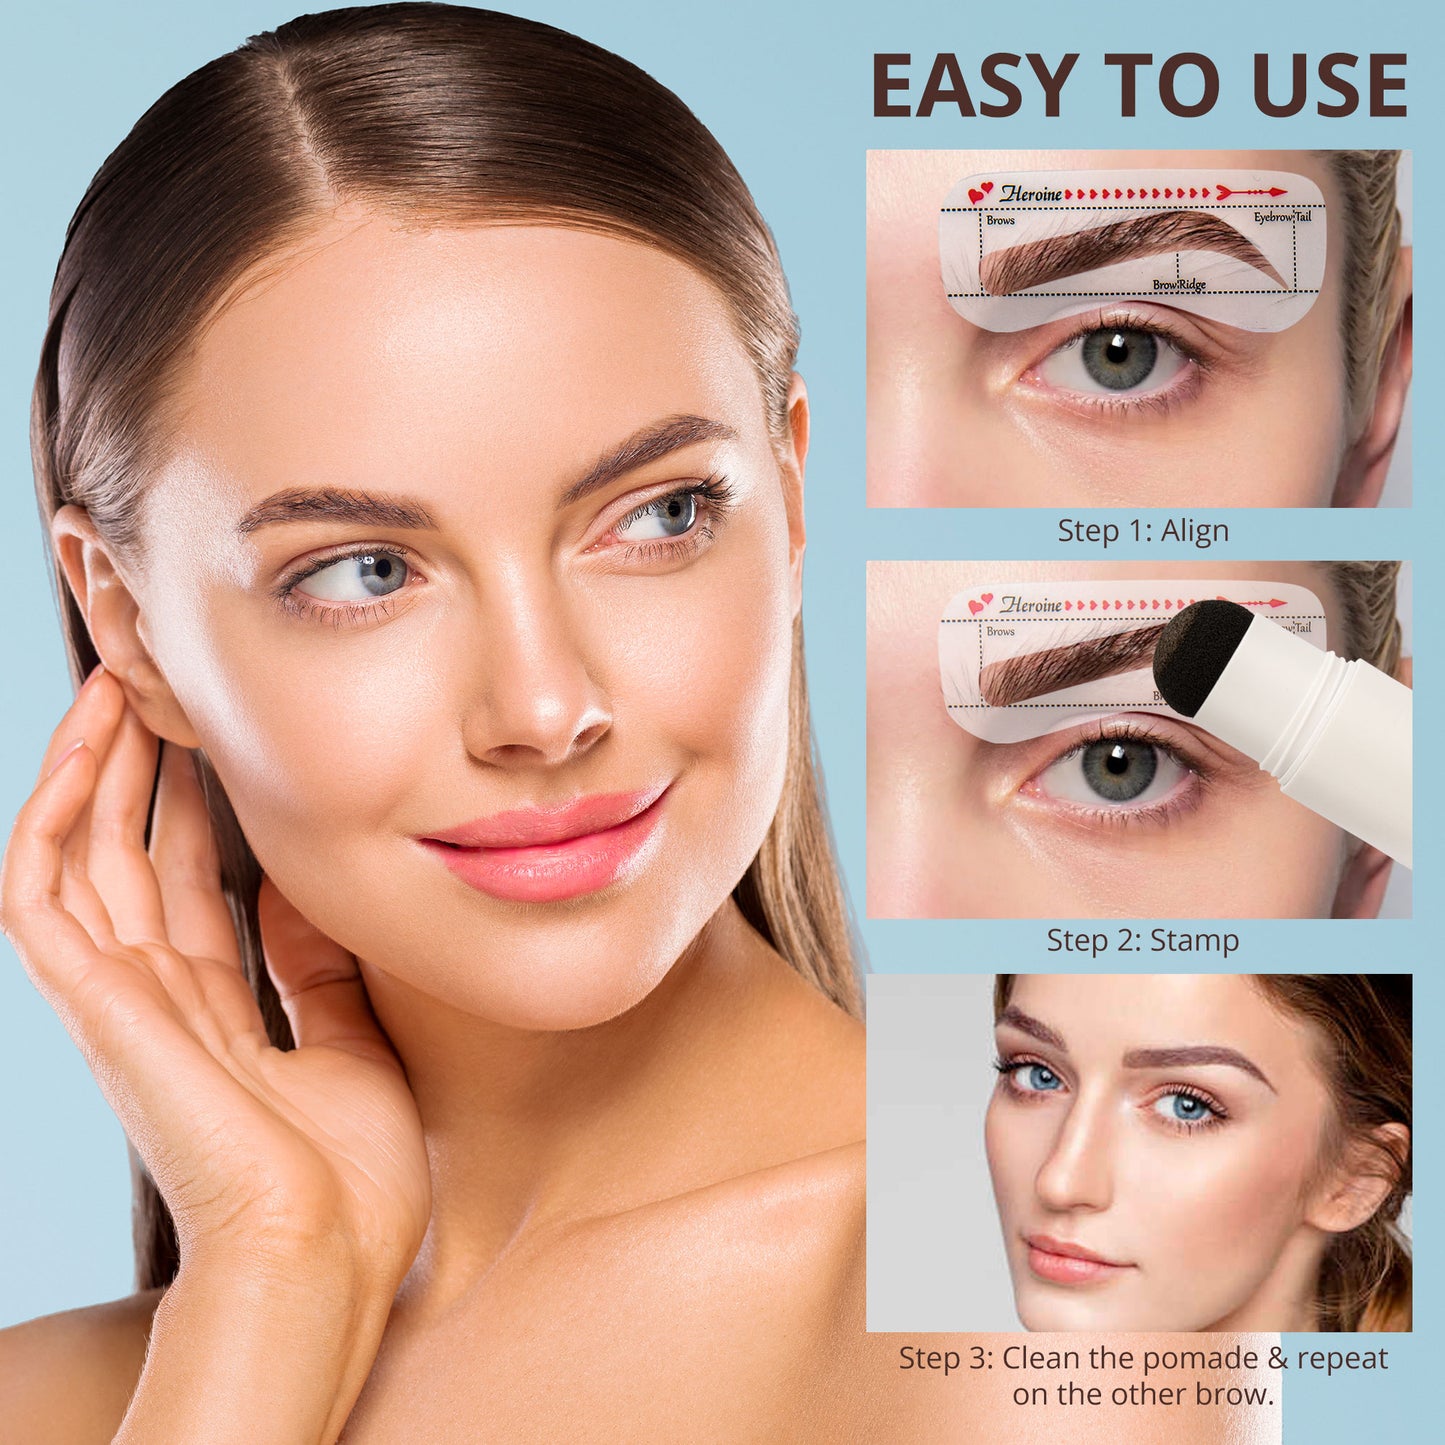 Eyebrow Stamp Stencil Kit-Brow Stamp And Shaping Kit- One Step Brow Stamp Kit -Waterproof Long-lasting Eyebrow Stamp